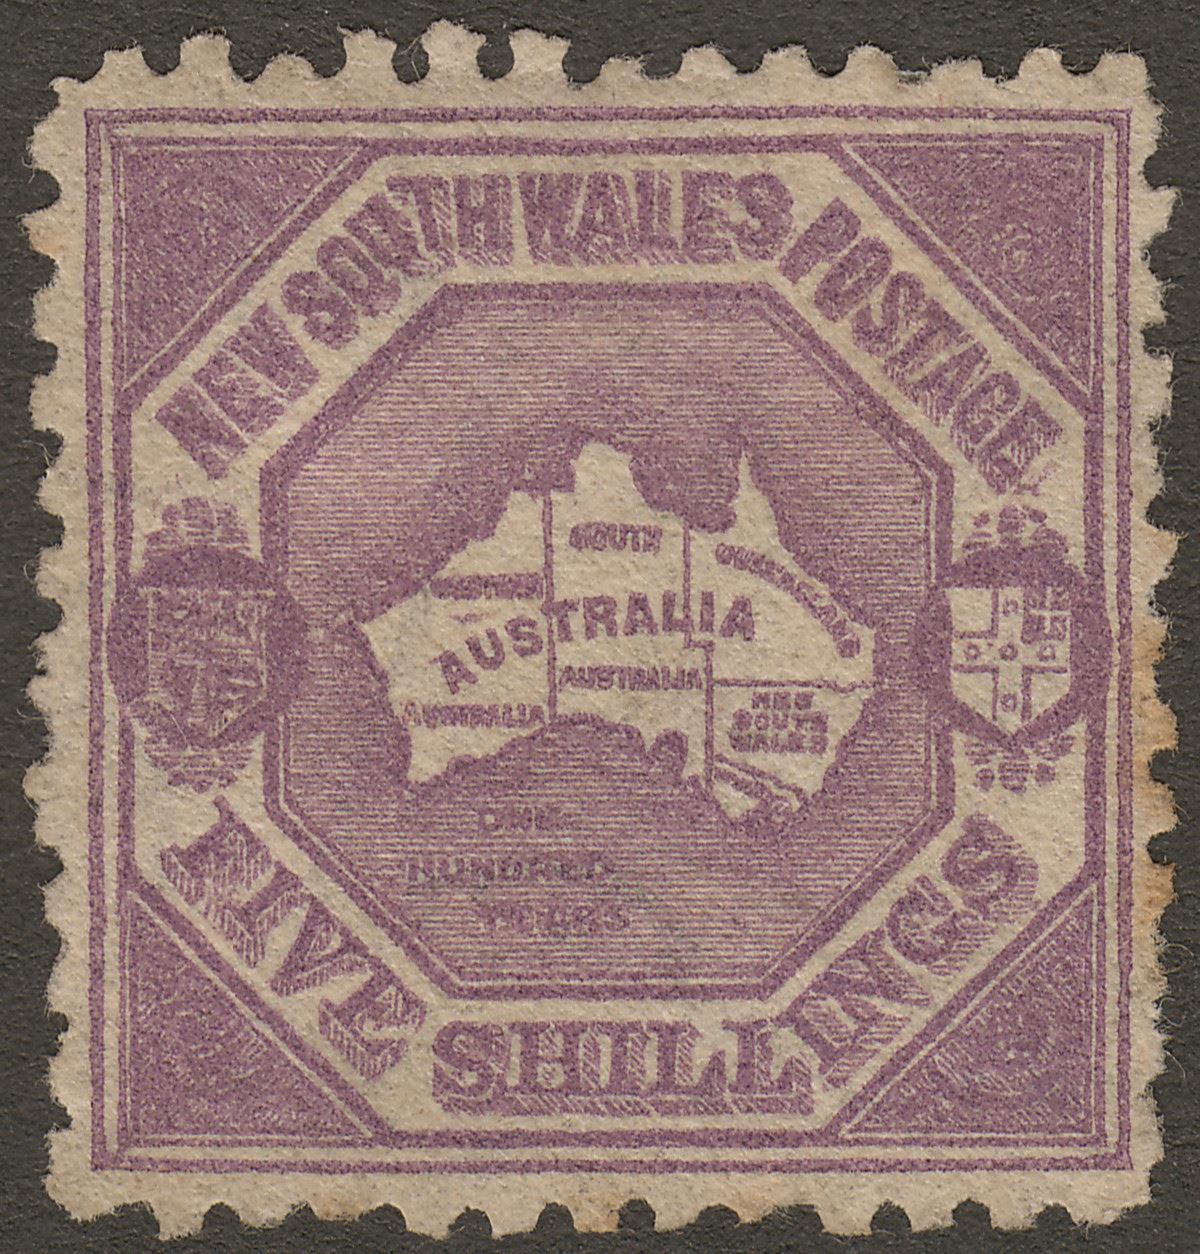 New South Wales 1889 Map 5sh Deep Violet Unused SG261a cat£425 as Mint Australia